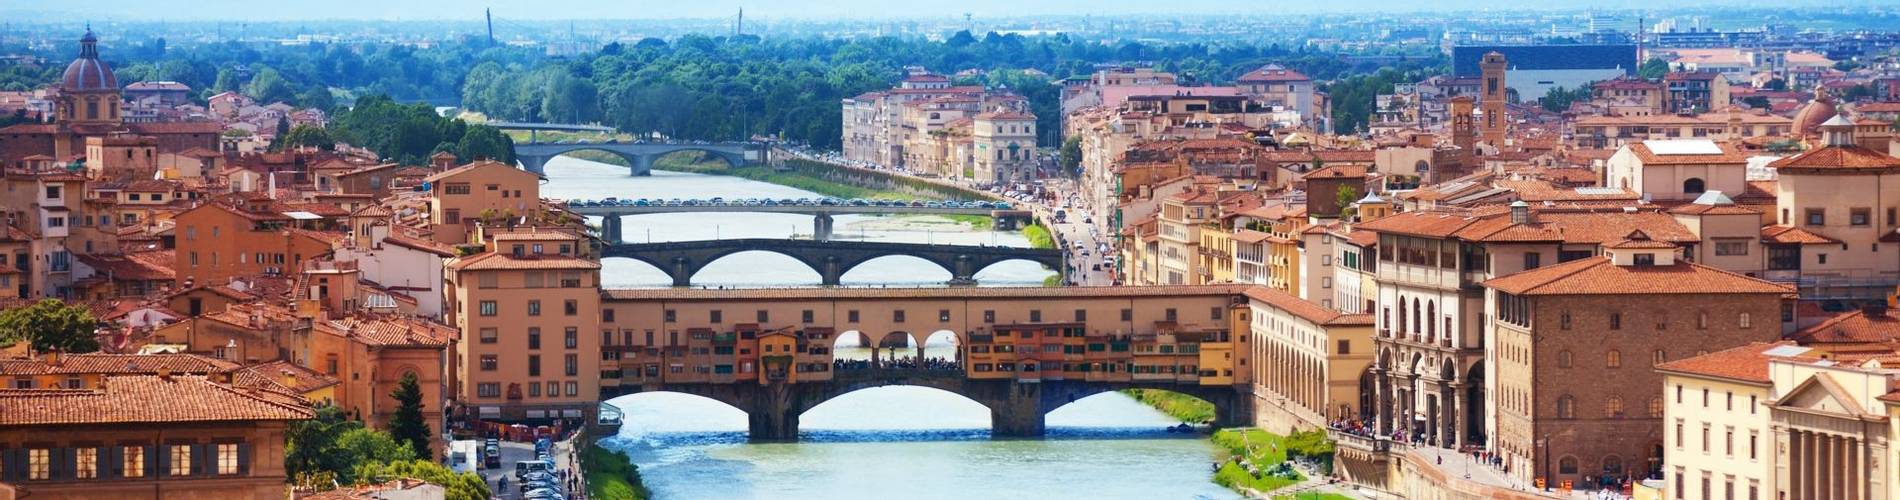 Arno river and Ponte Vecchio in Florence.jpg